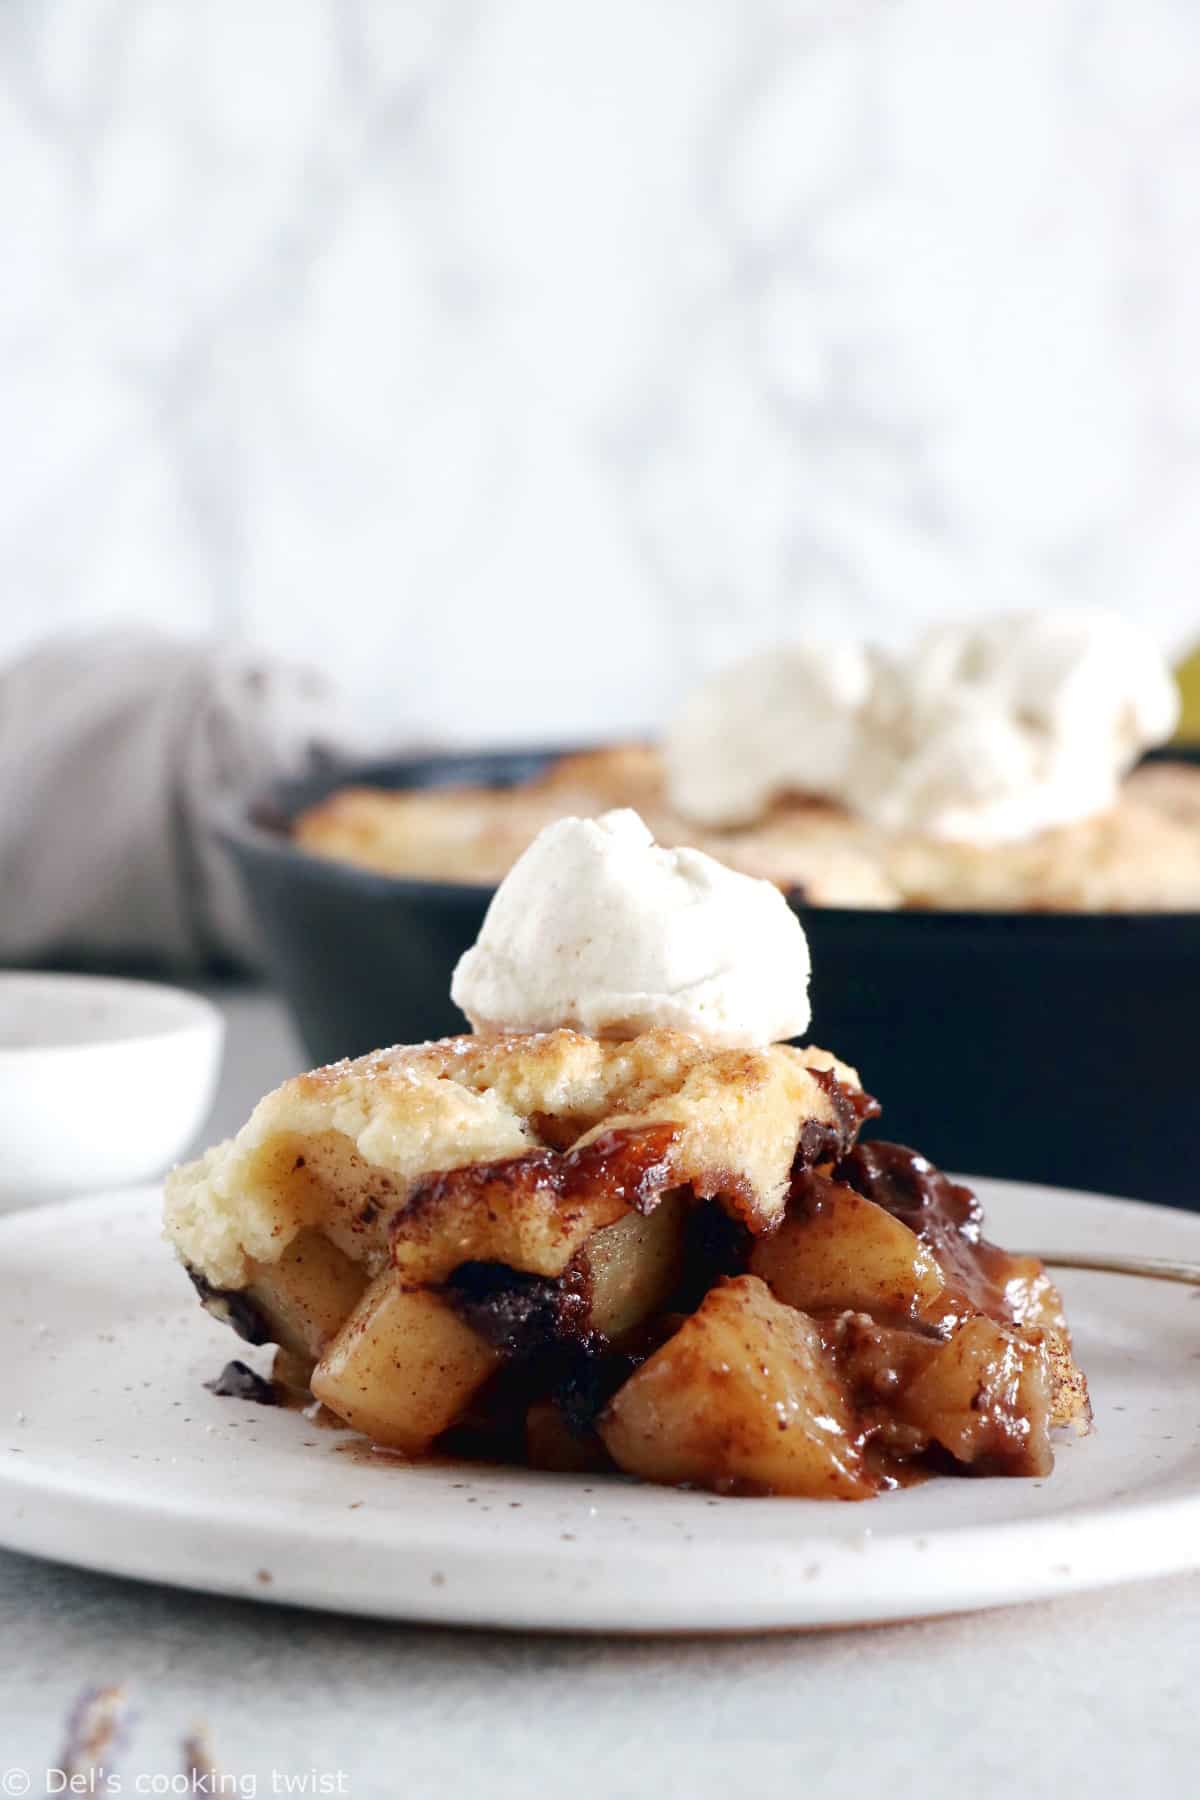 Spiced Chocolate Pear Cobbler is a beautiful dessert featuring dropped biscuit and seasonal fruits coated with a mix of warm Autumn spices and dark chocolate.